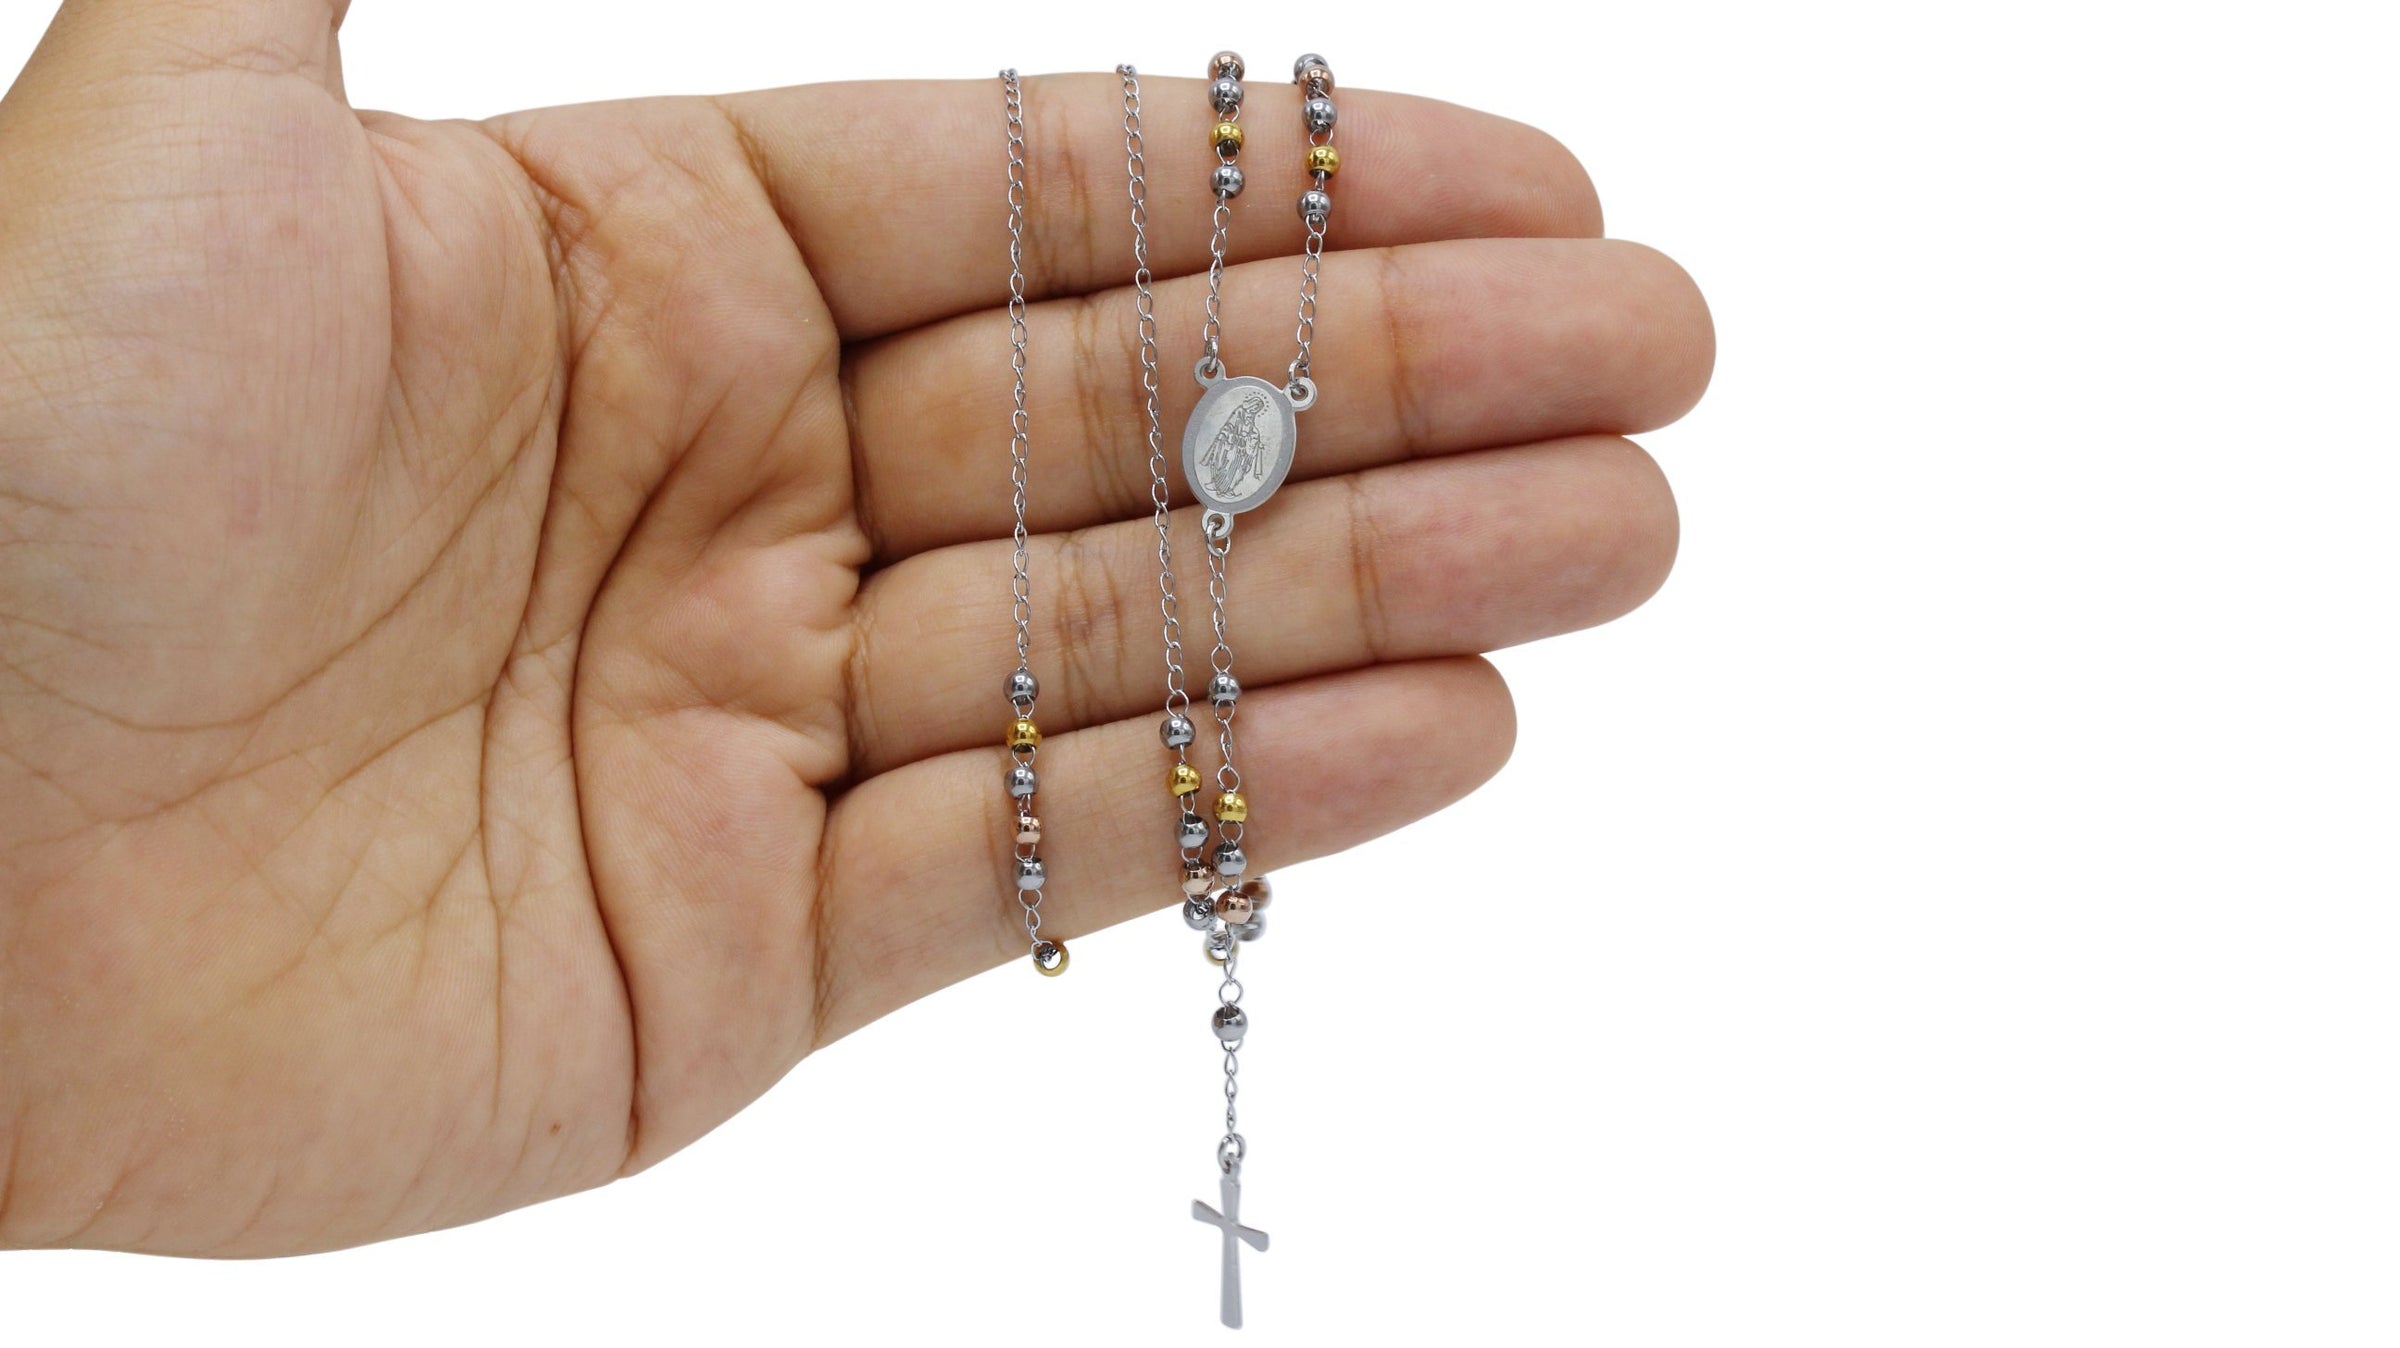 Traditional Tri Tone Rosary Necklace Five Decade Catholic Prayer Beads 3 mm